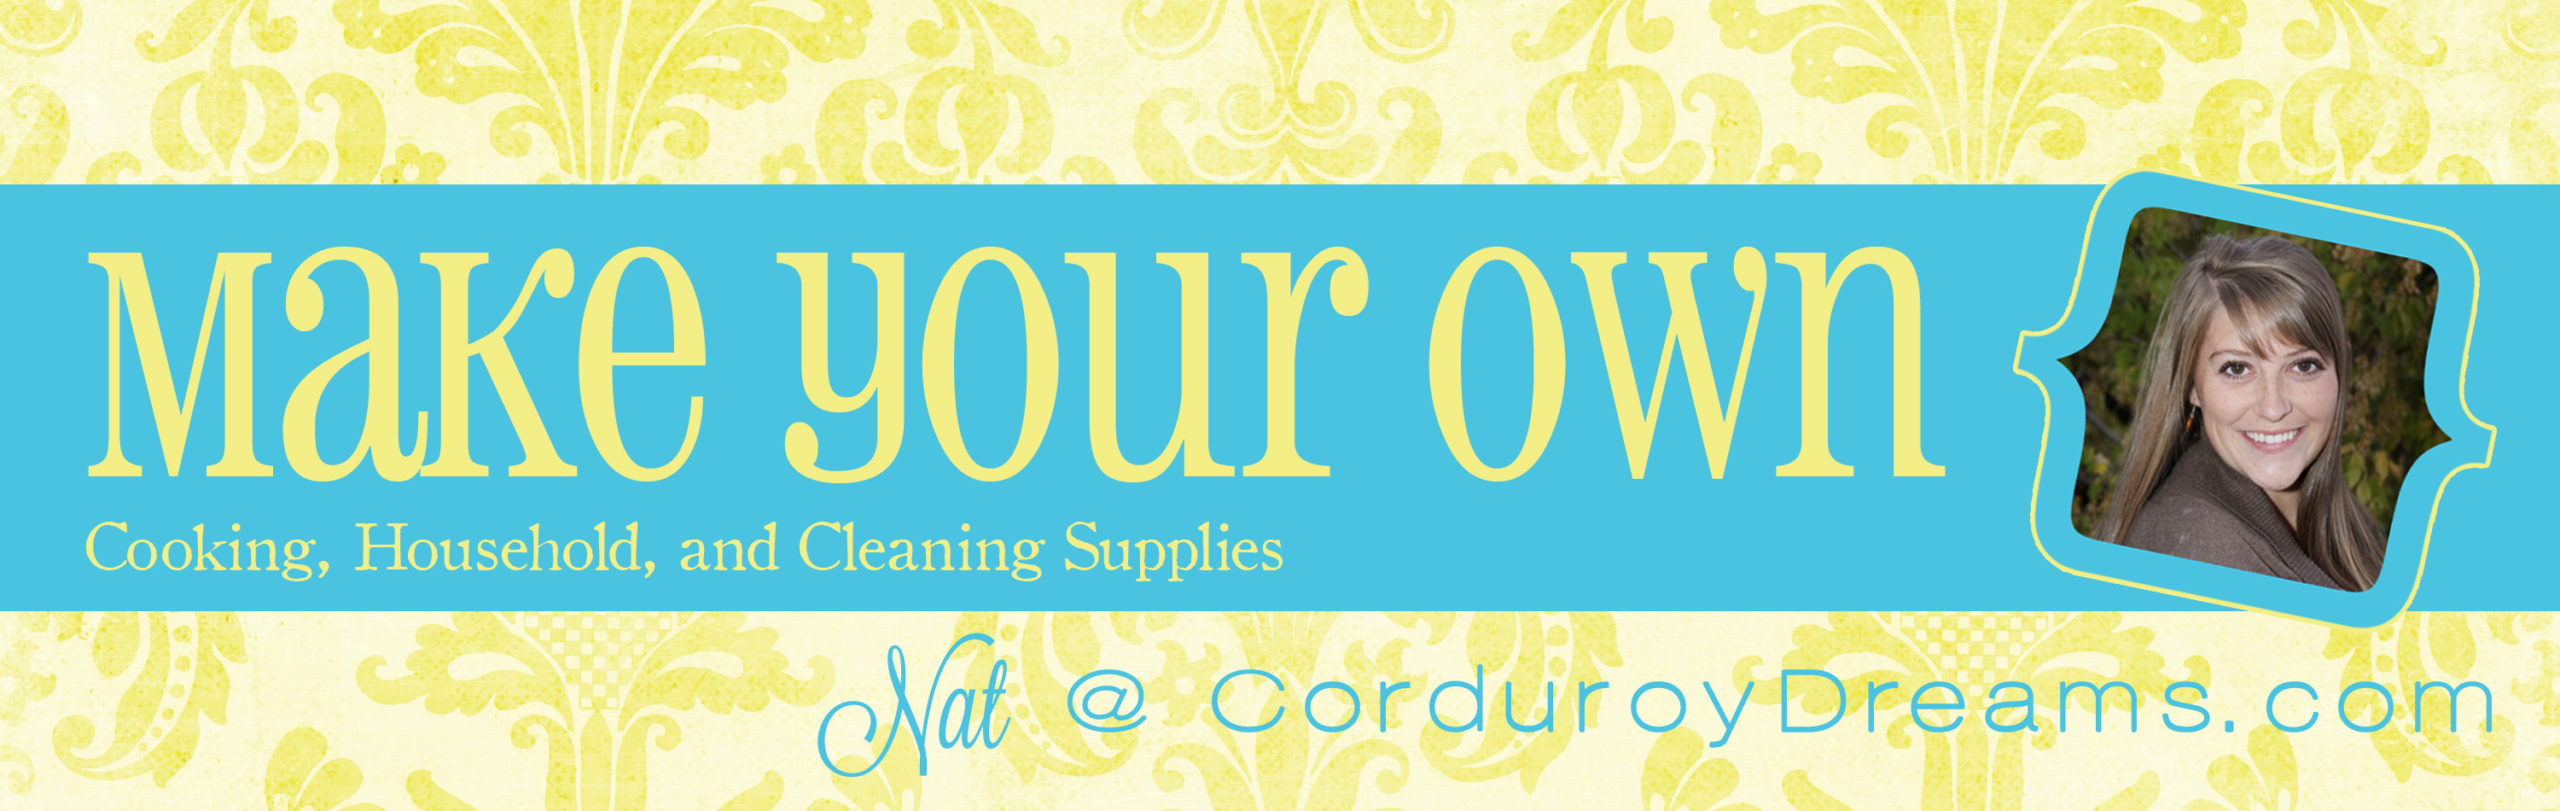 Make your own header - The Creative Mom